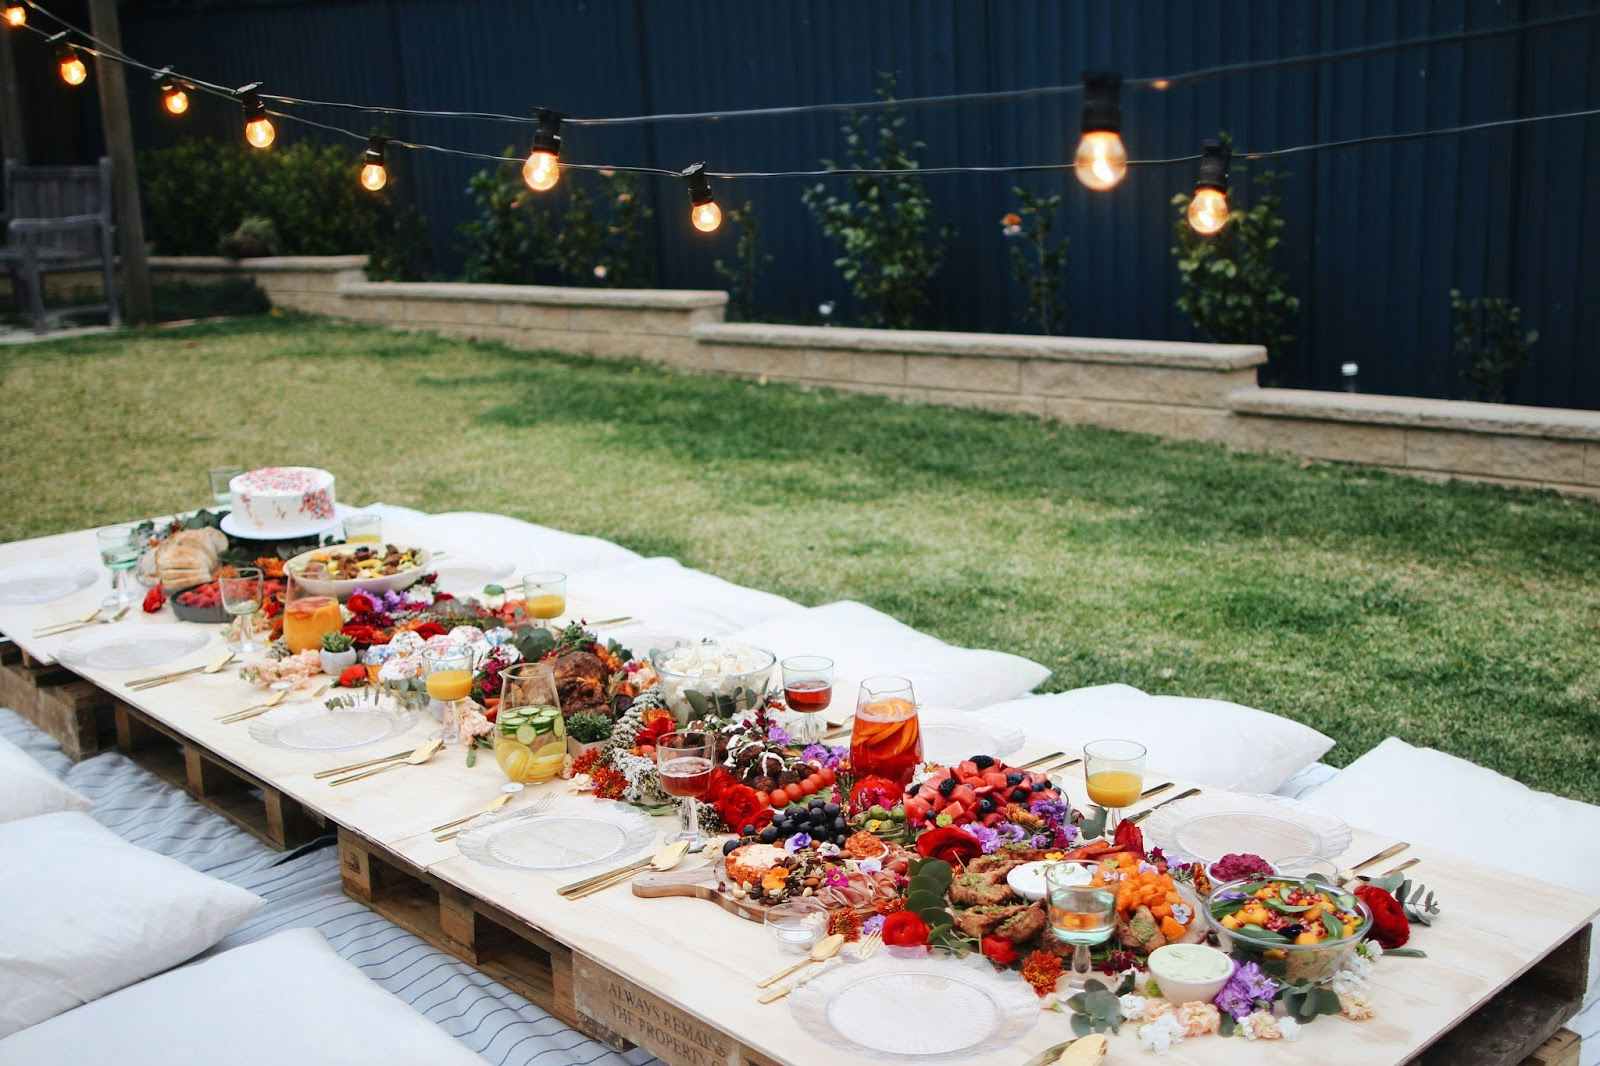 Several wooden pallets laid out in a backyard as a picnic table, with a table cloth, table settings, and flowers decorating it, and pillows for seats around them.